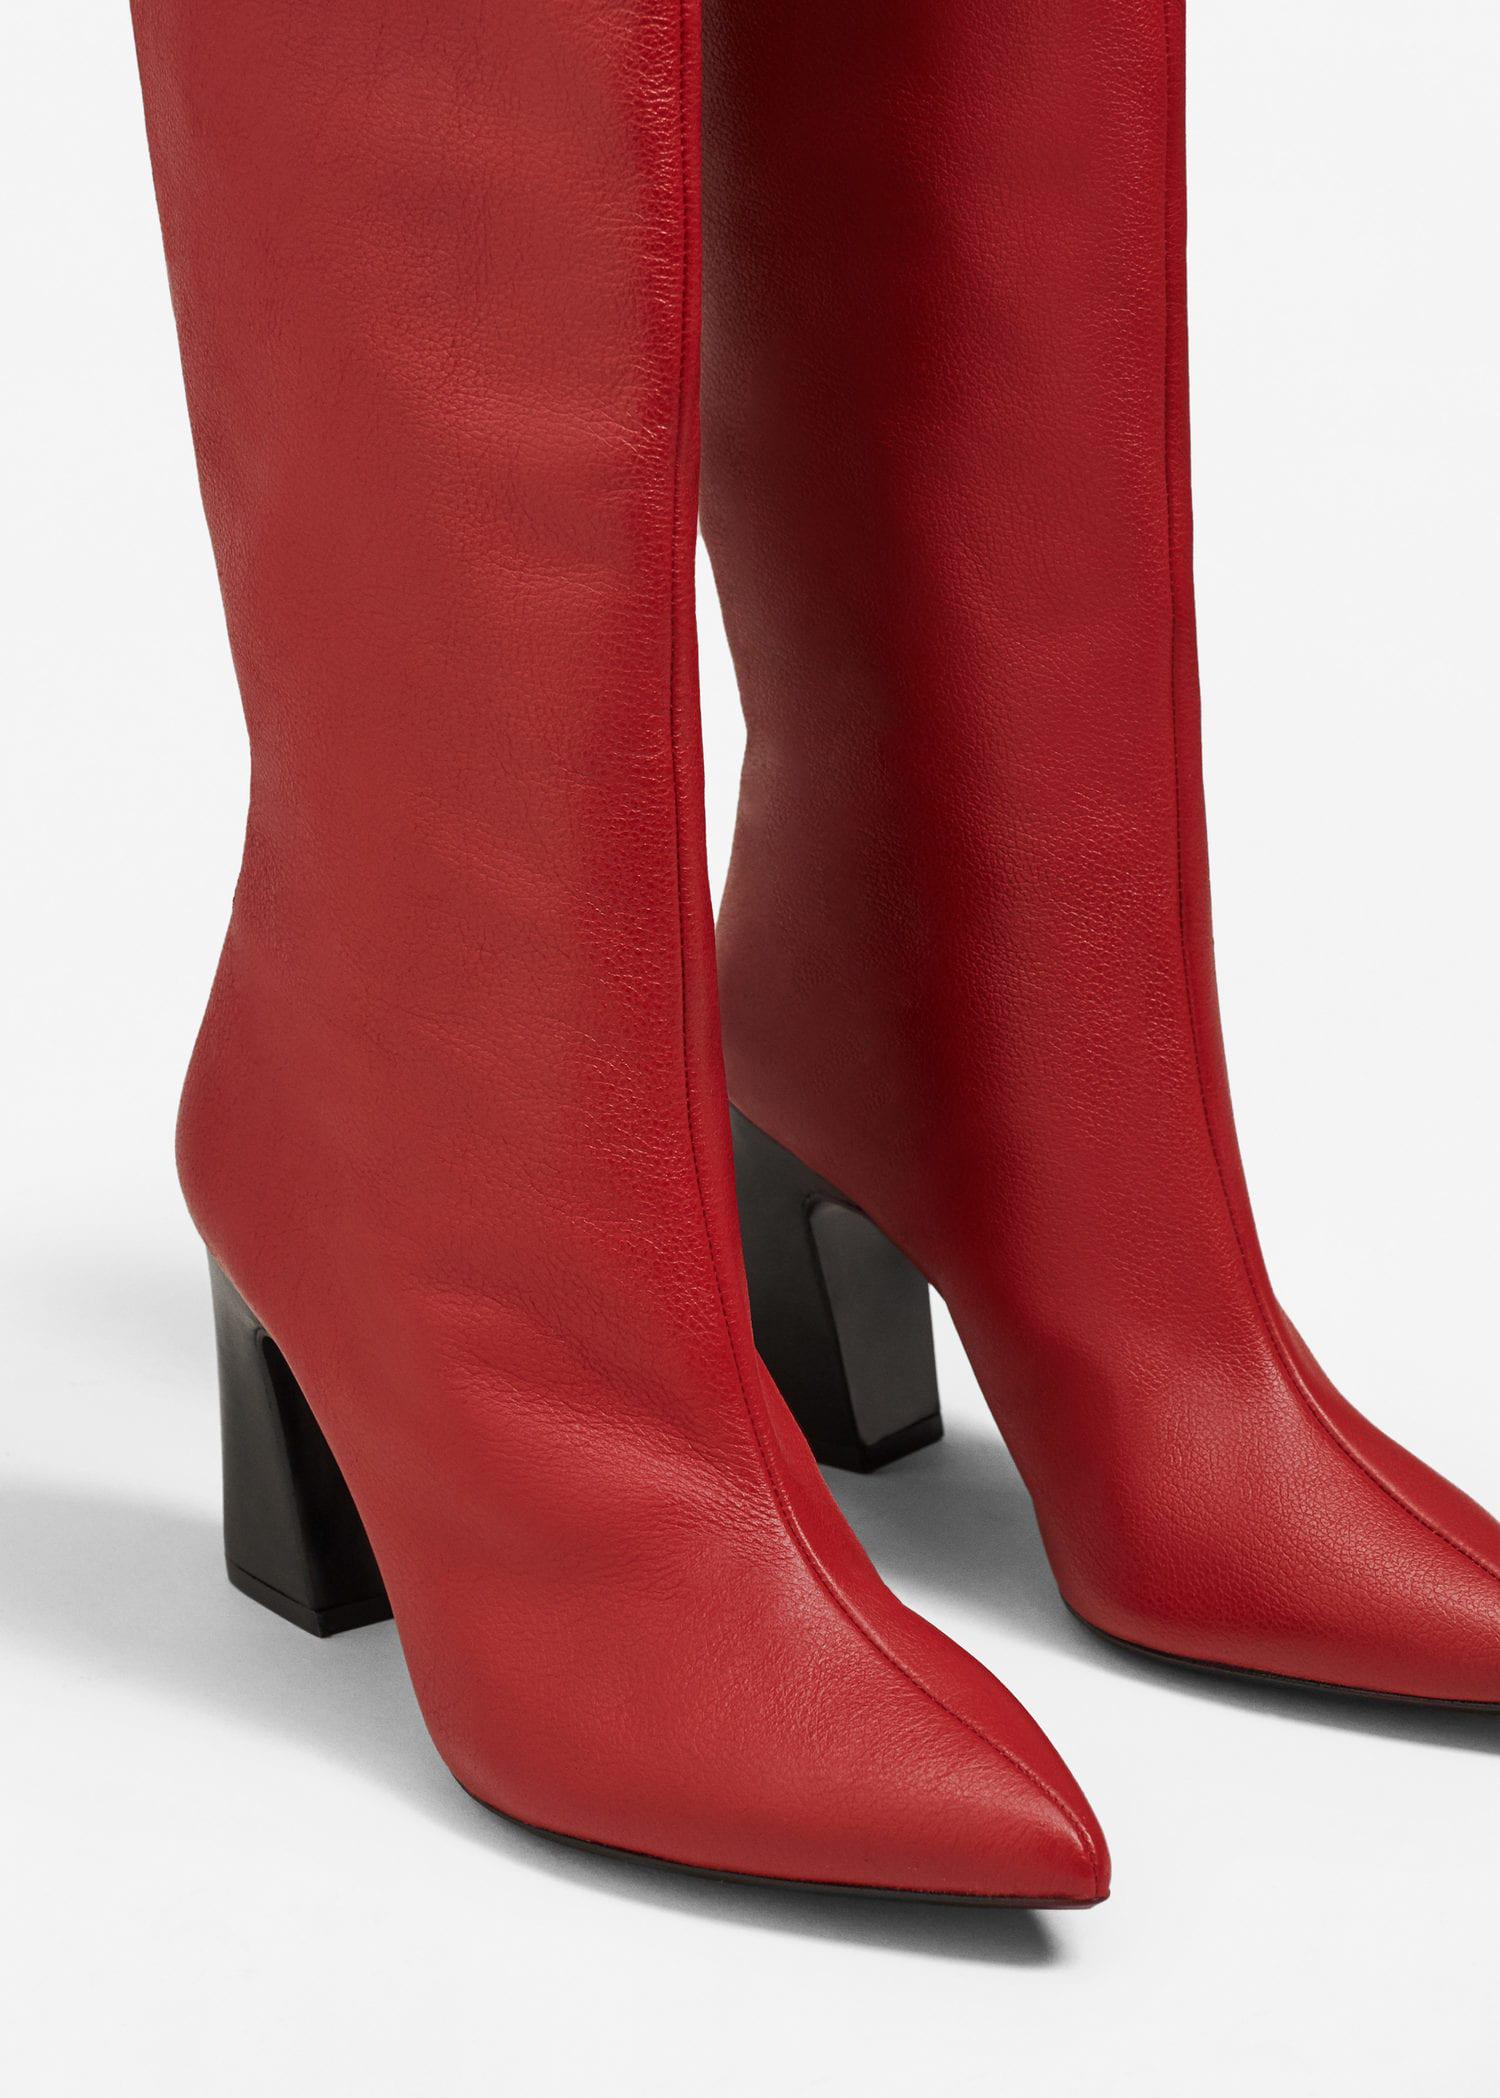 Mango Leather High-leg Boots in Red - Lyst